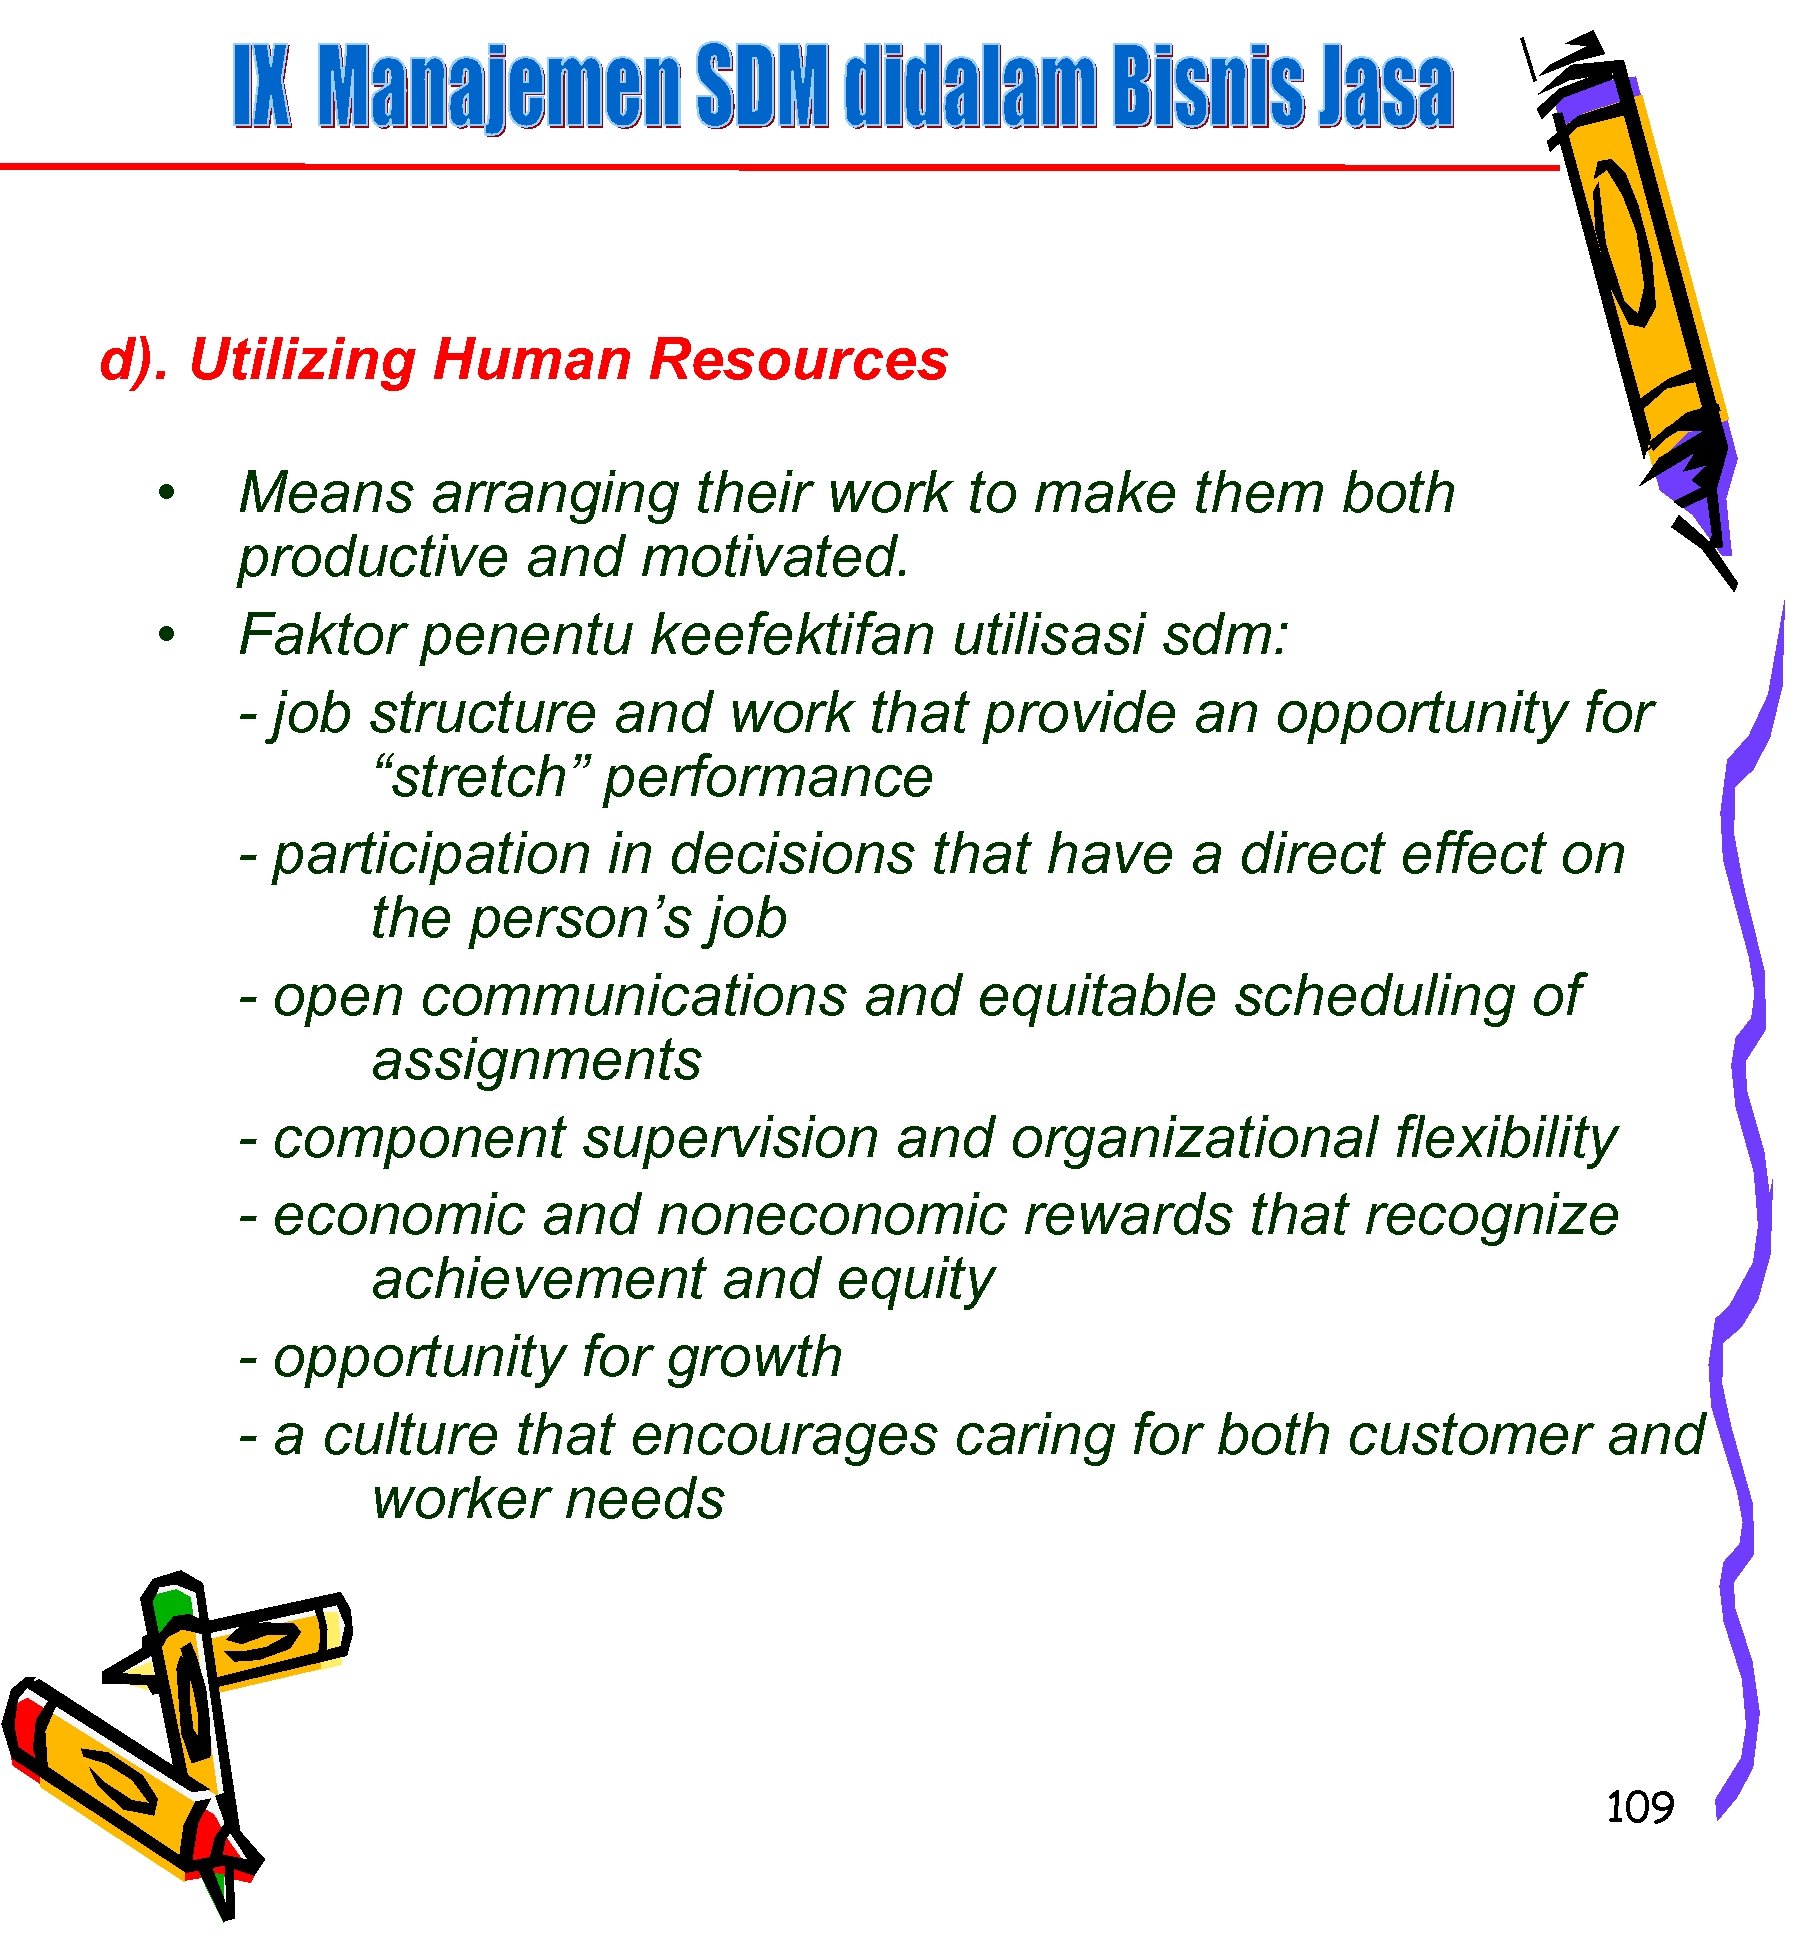 d). Utilizing Human Resources • Means arranging their work to make them both productive